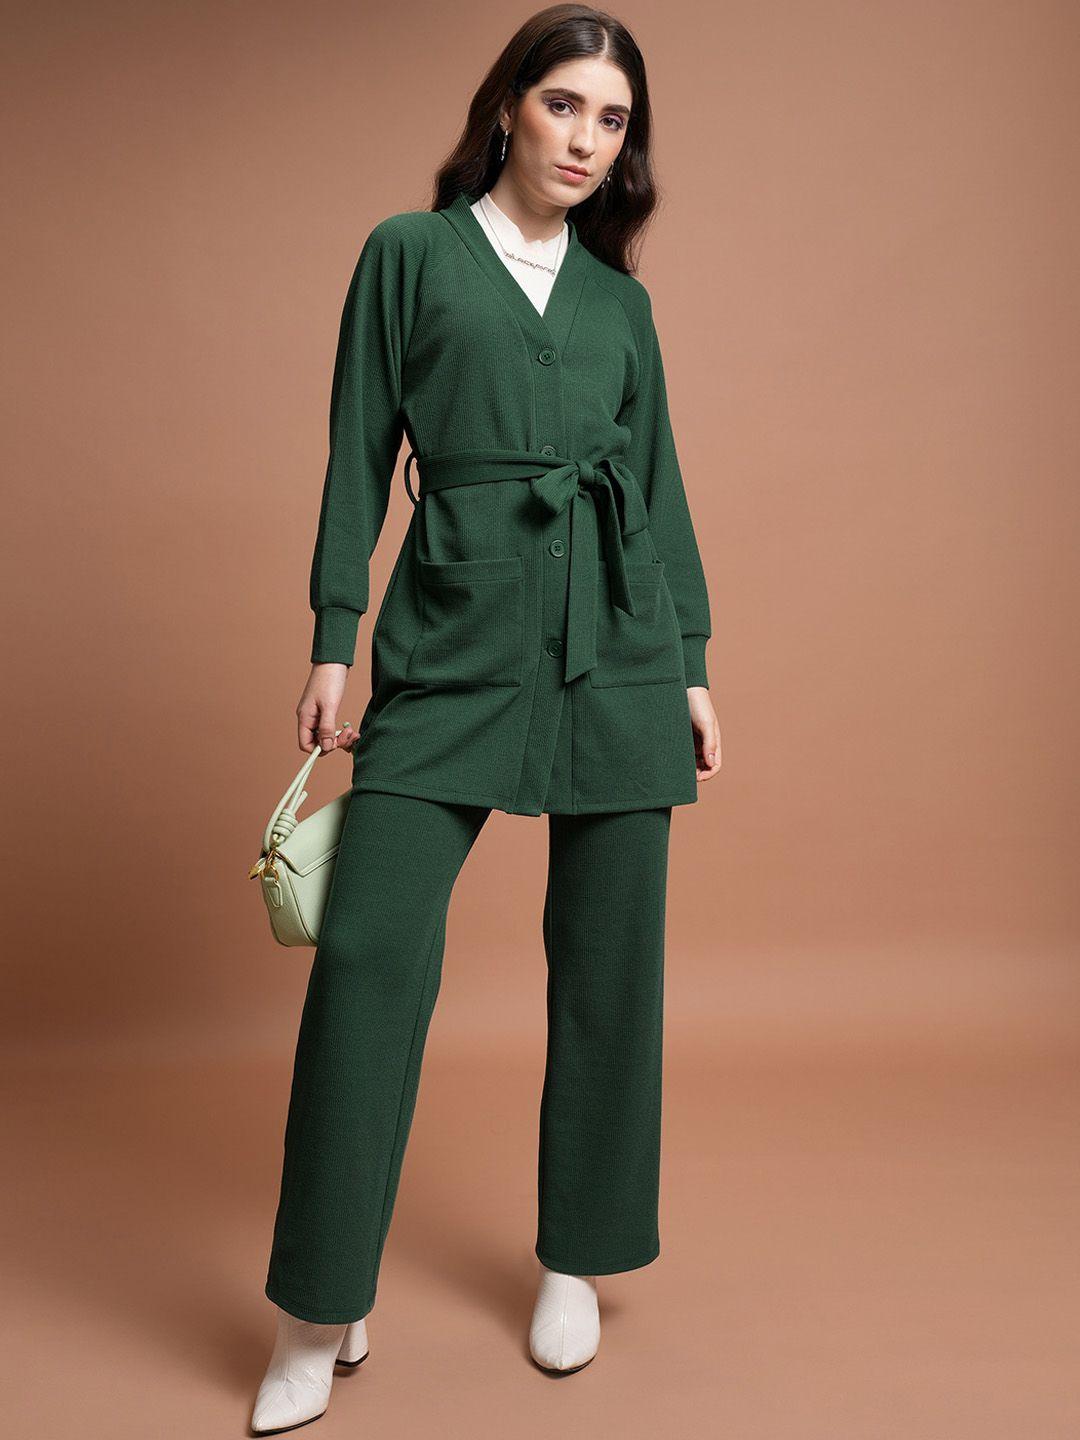 tokyo talkies green v-neck sweater & trousers co-ords